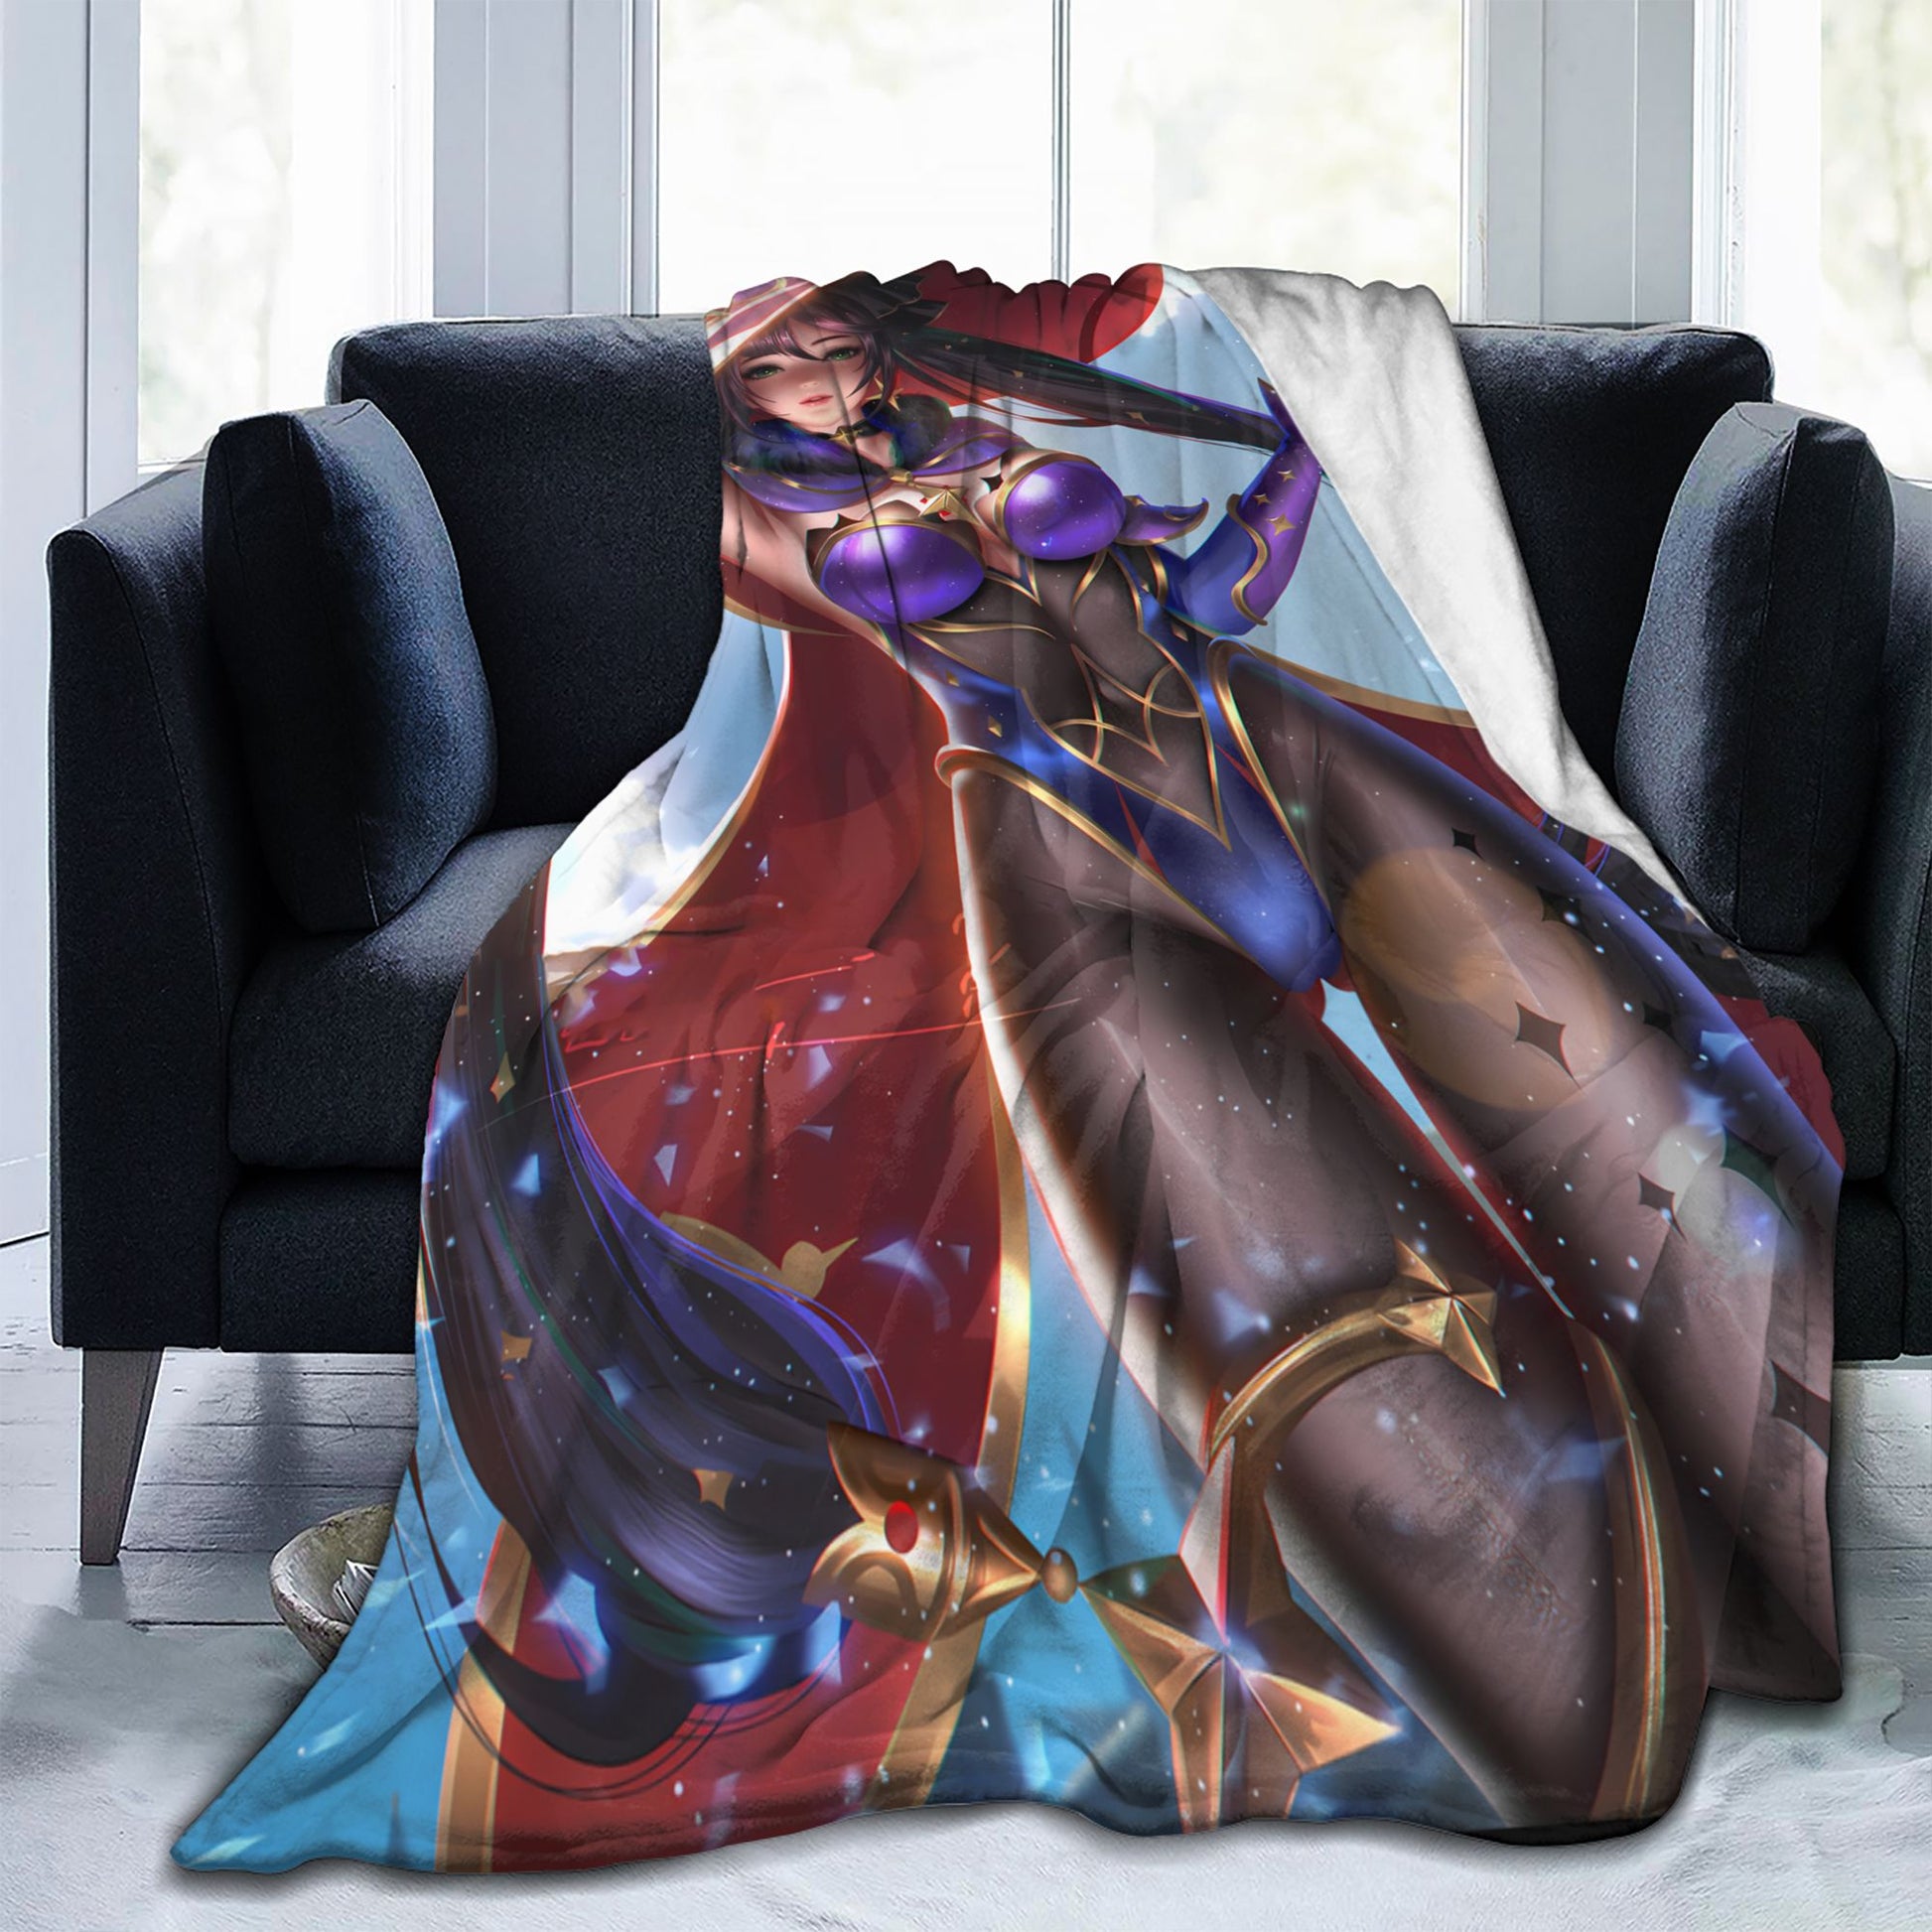 Miu Muu Genshin Impact Hooded Blanket Throw, Plush Flannel Wearable Poncho Blanket Fleece Throw Wrap Cape, Ultra Soft, One Size, Gift For Game Fans